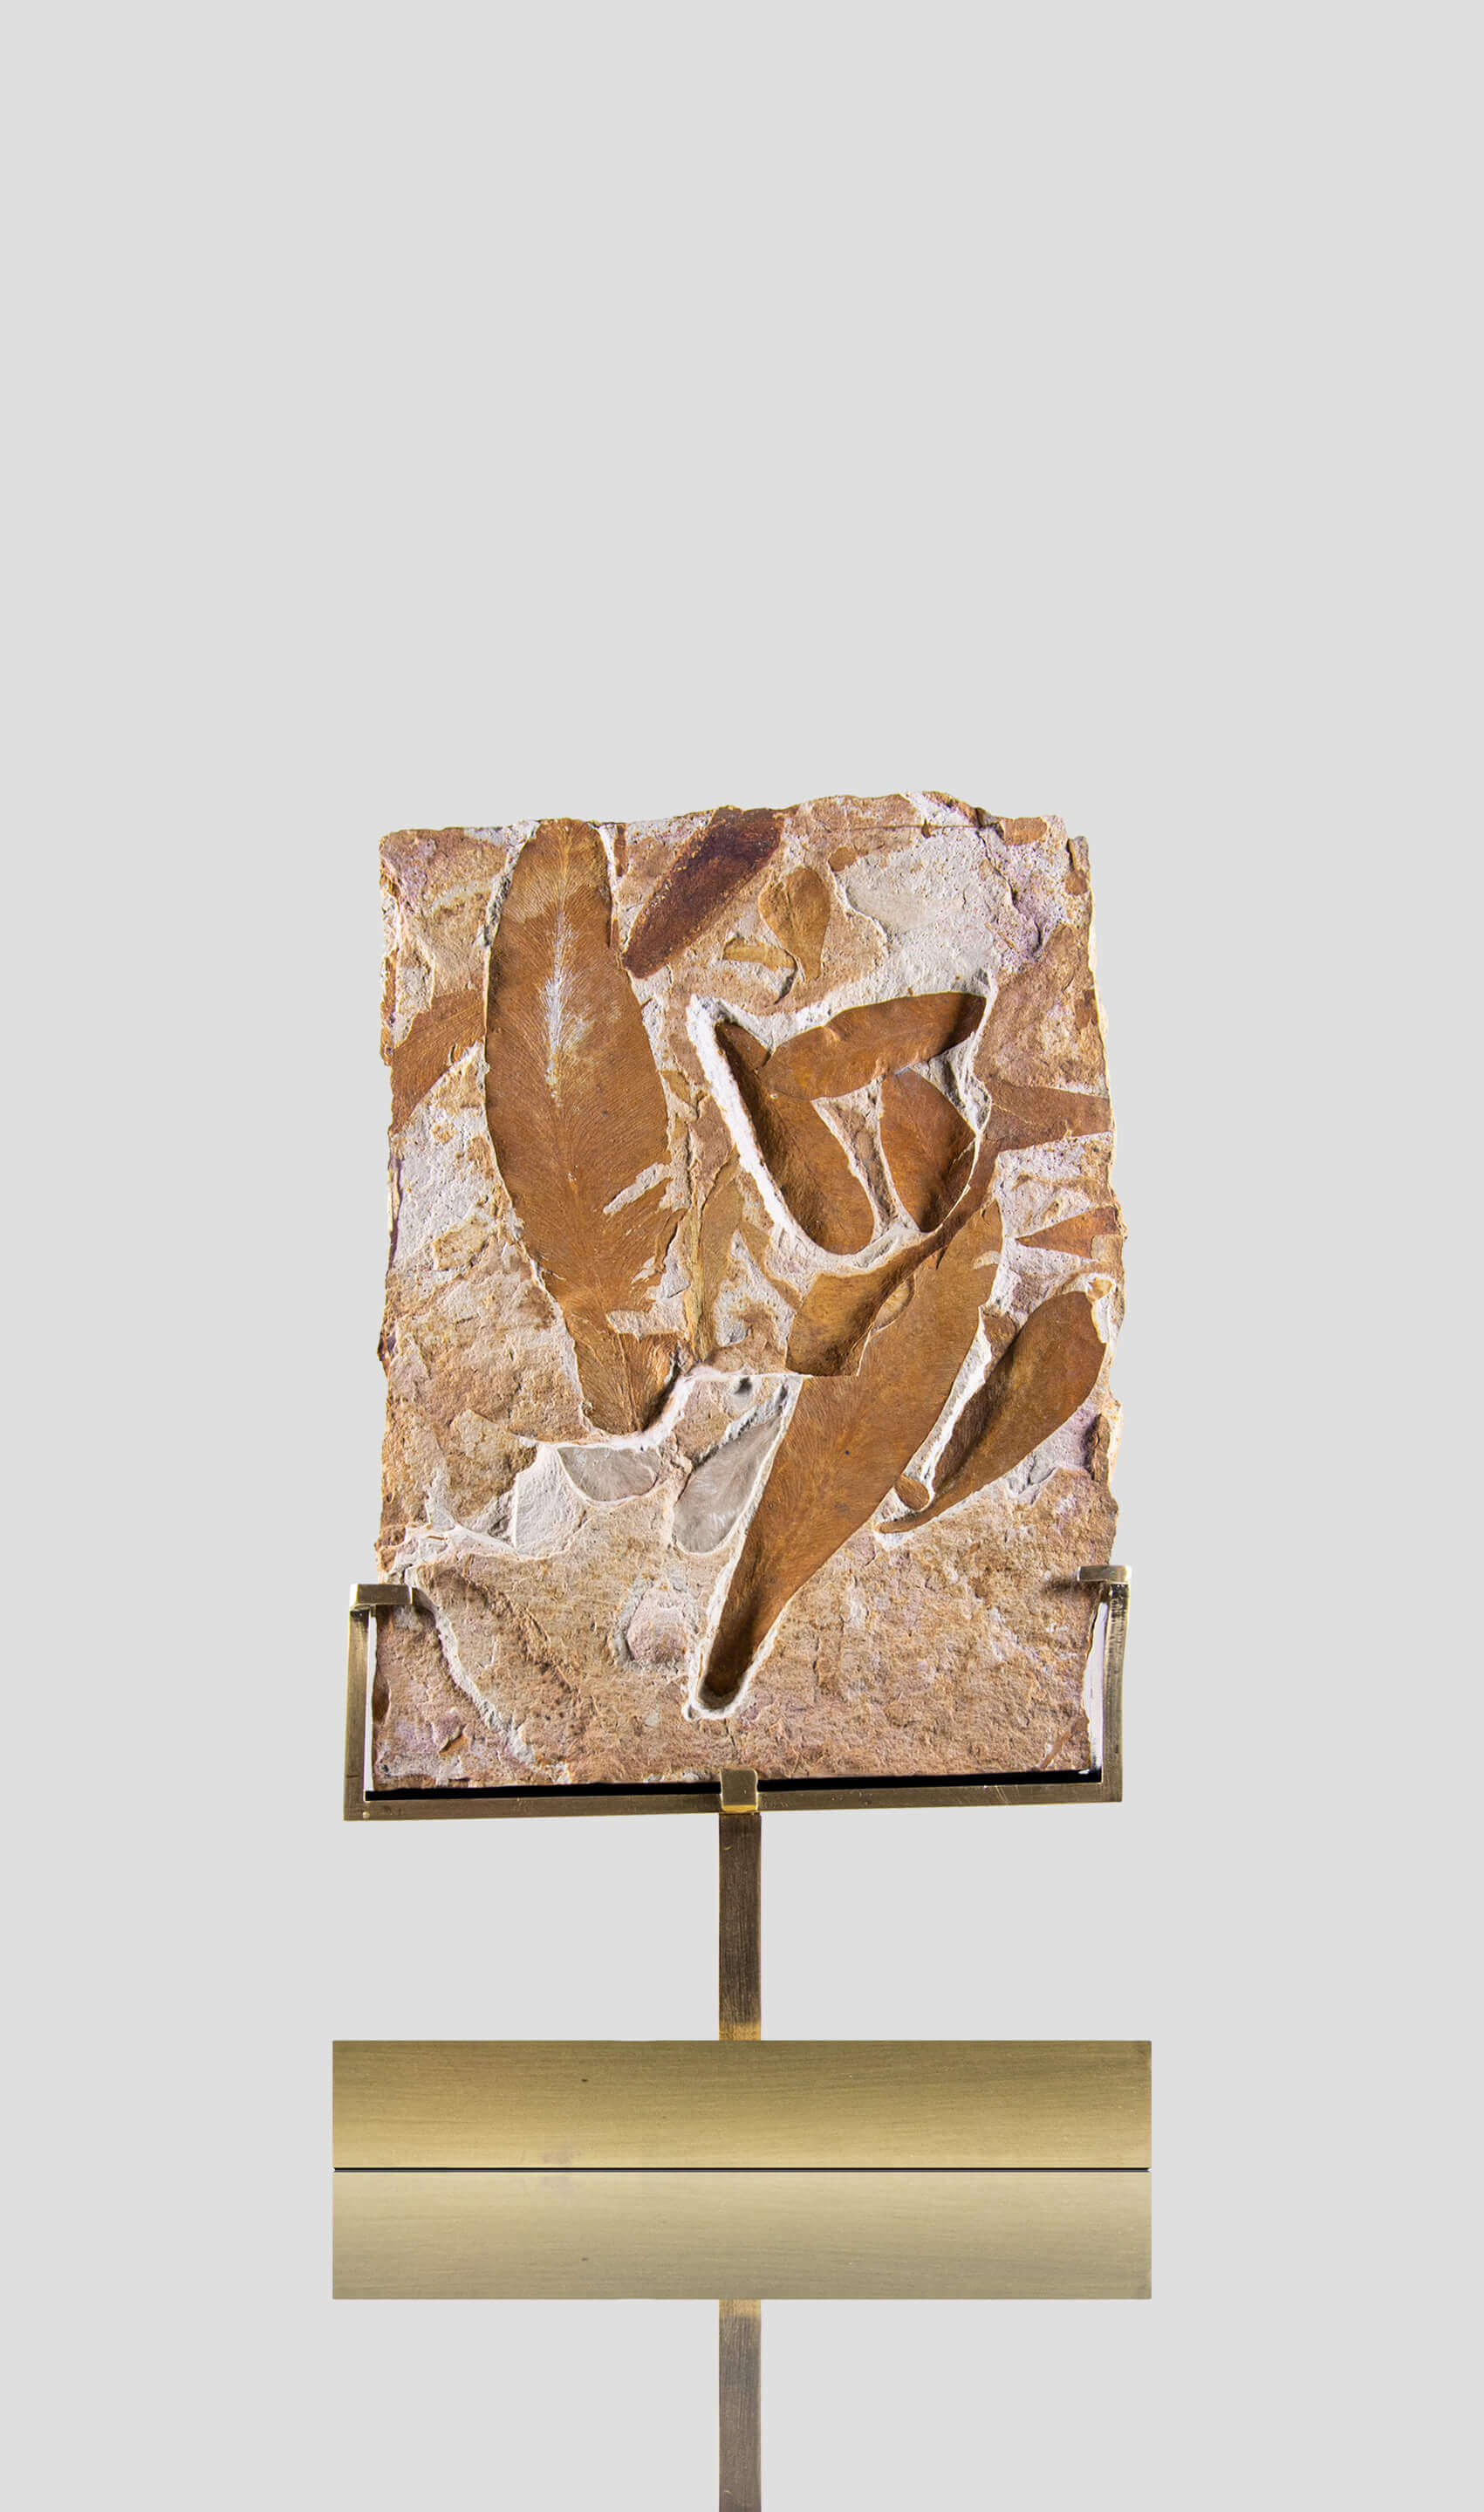 An American flor leaf fossil plate presented on a beautiful brass stand for fossil interior display 2